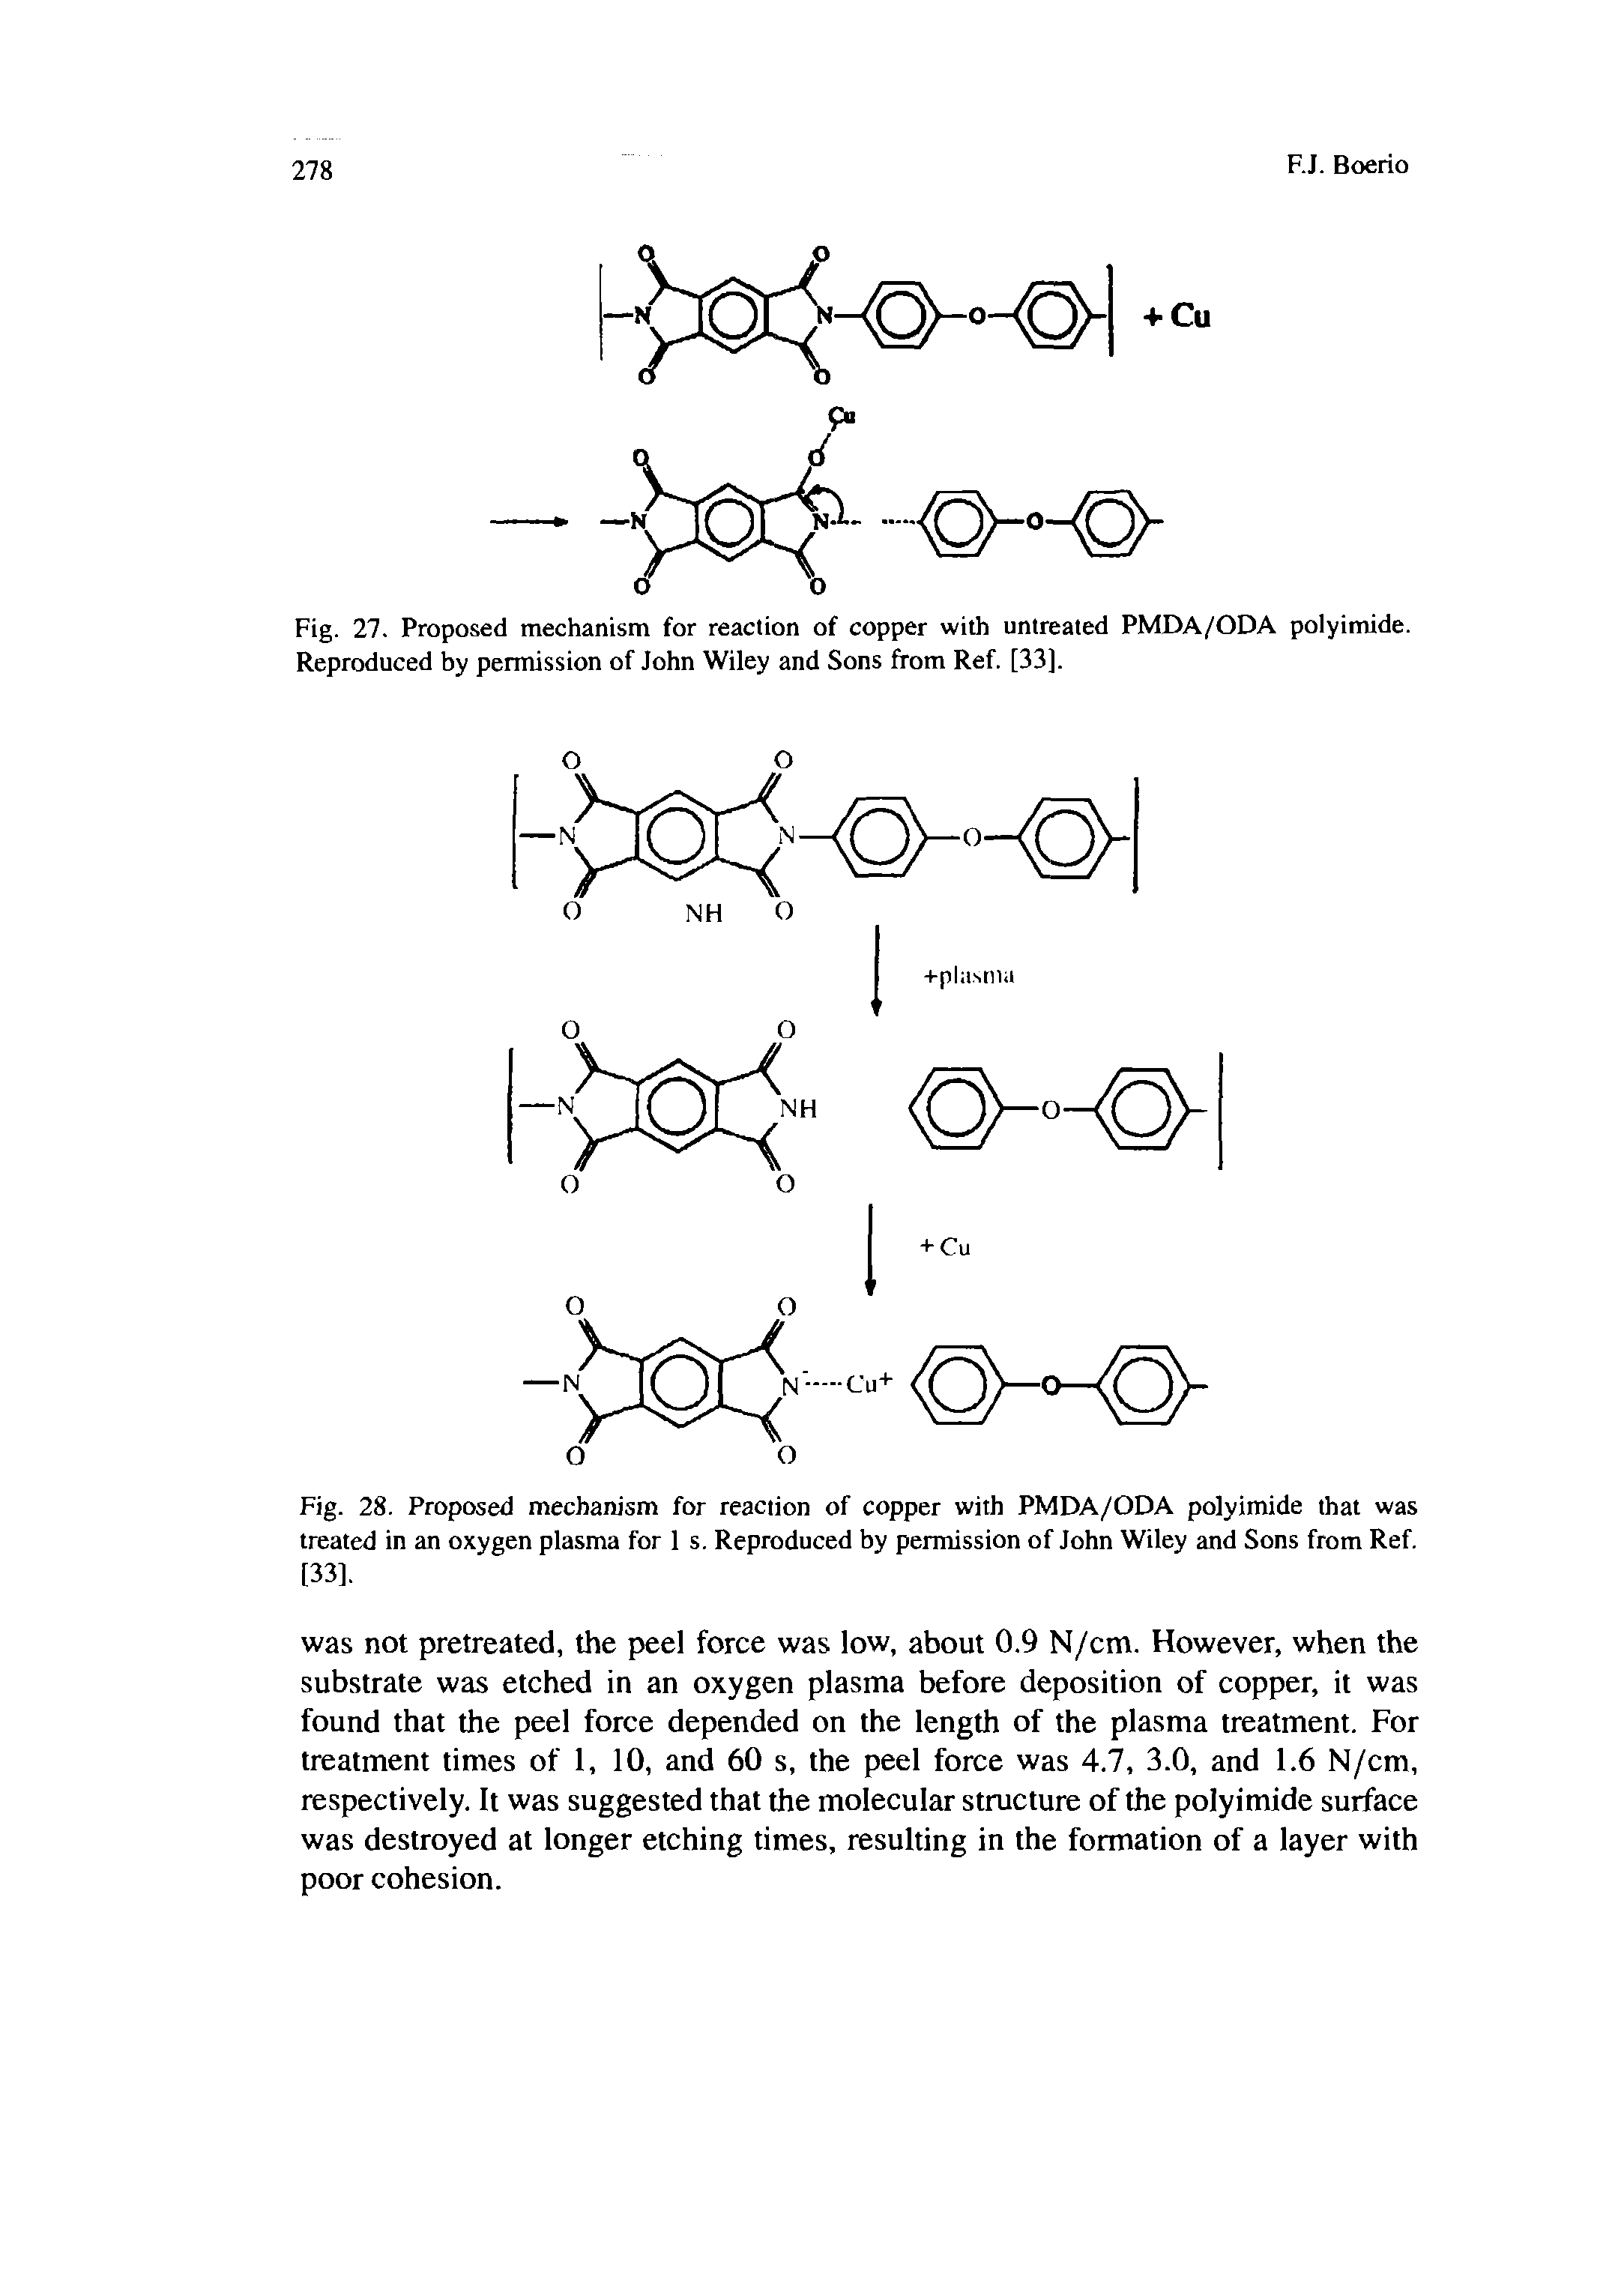 Fig. 27. Proposed mechanism for reaction of copper with untreated PMDA/ODA polyimide. Reproduced by permission of John Wiley and Sons from Ref. [33].